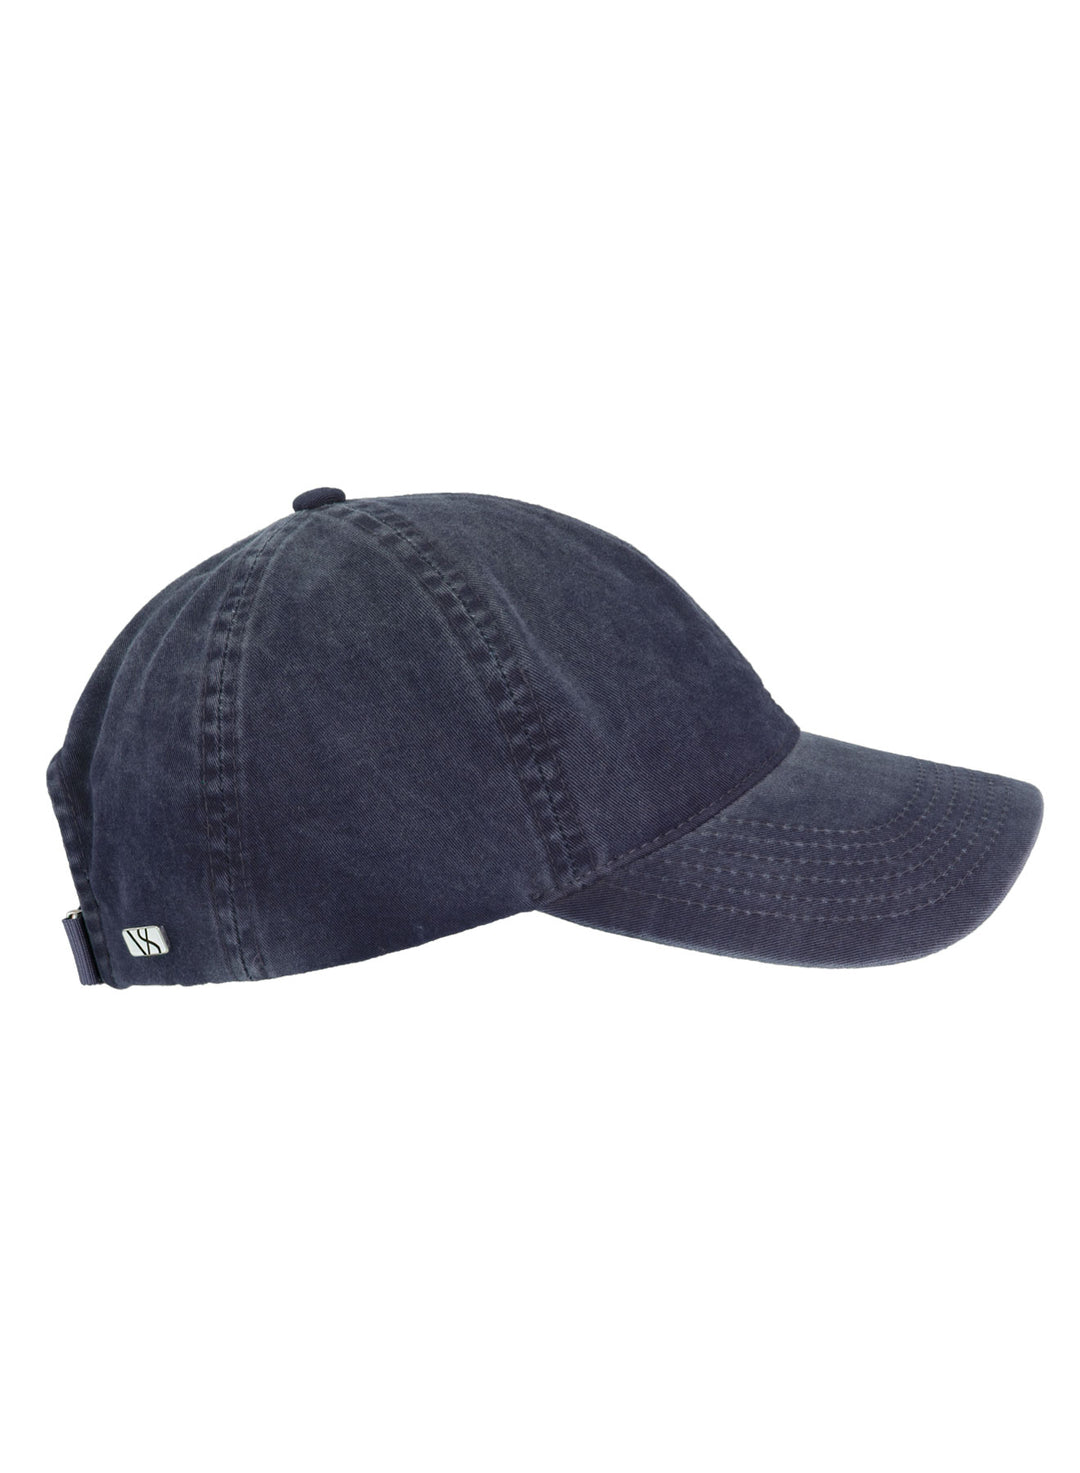 NAVY WASHED COTTON